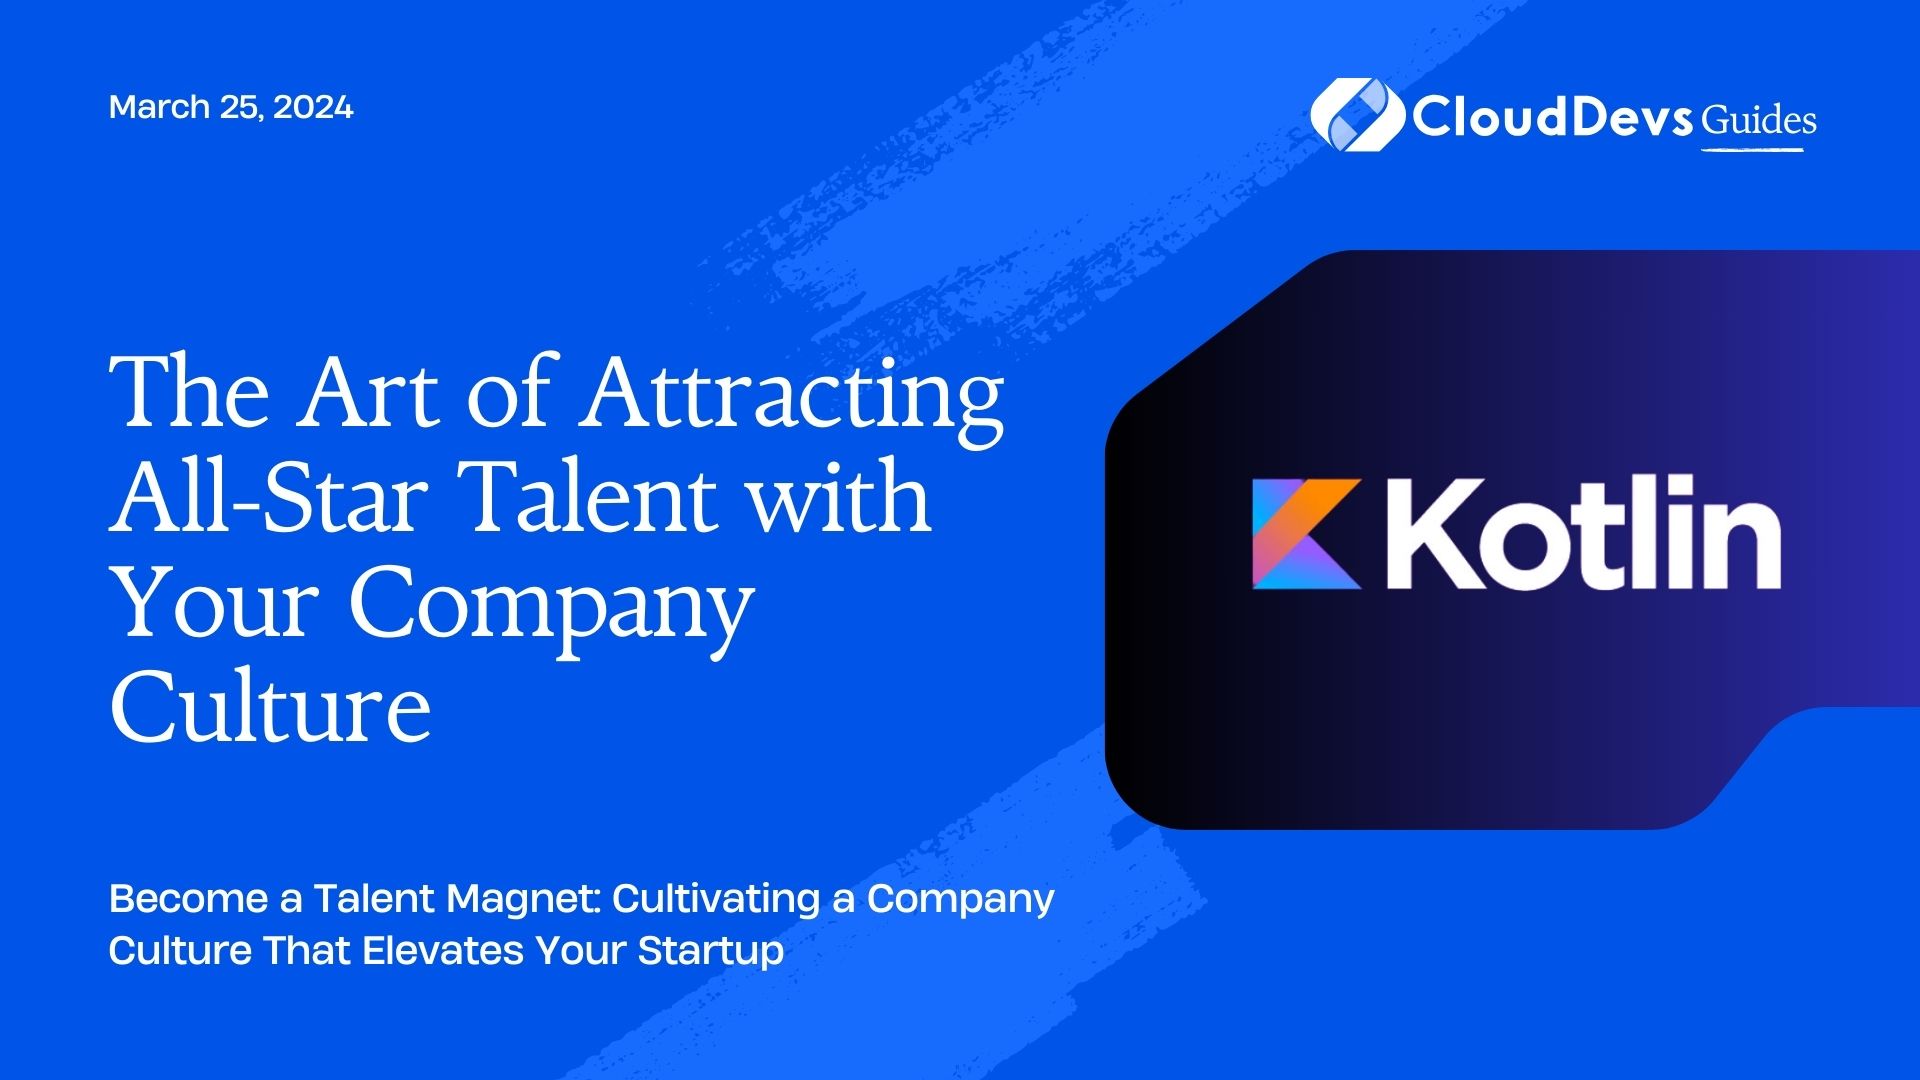 The Art of Attracting All-Star Talent with Your Company Culture